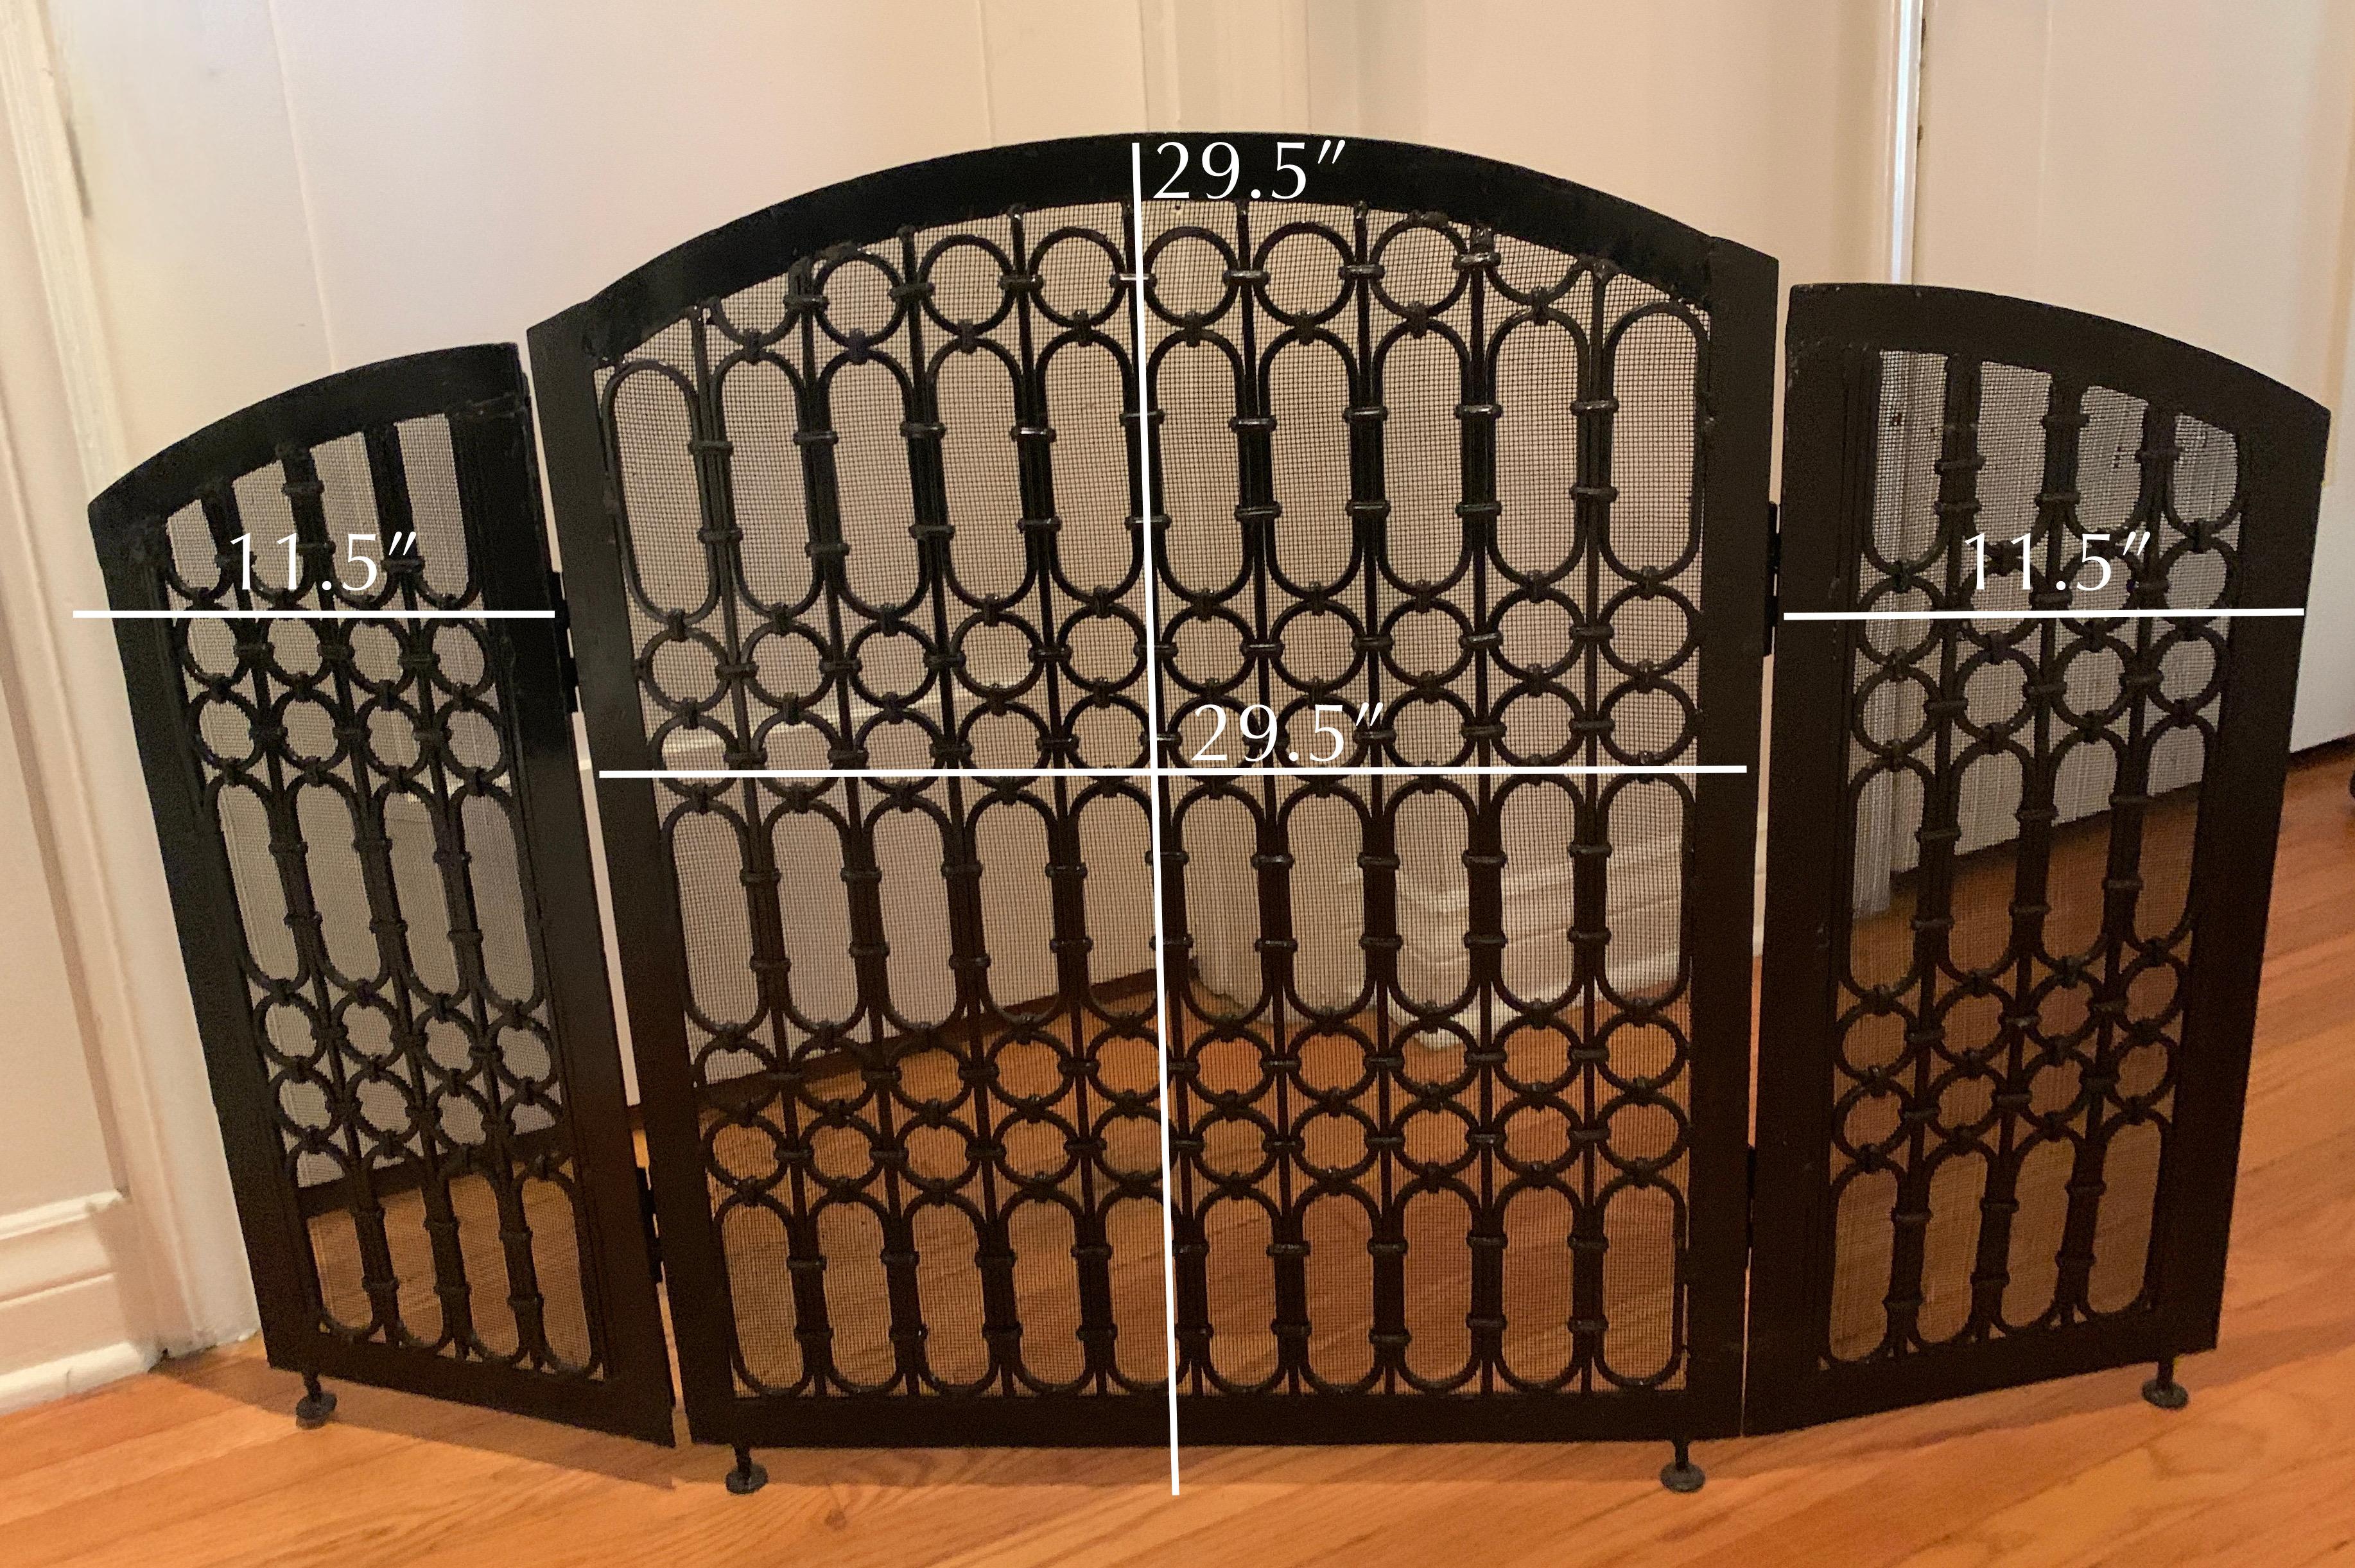 Very heavy and beautifully fabricated three panel fireplace screen - A thoughtful design that is a well made free standing wrought iron screen, very intricate linked round and oblong loops make up the three panels.. Most definitely compliments any